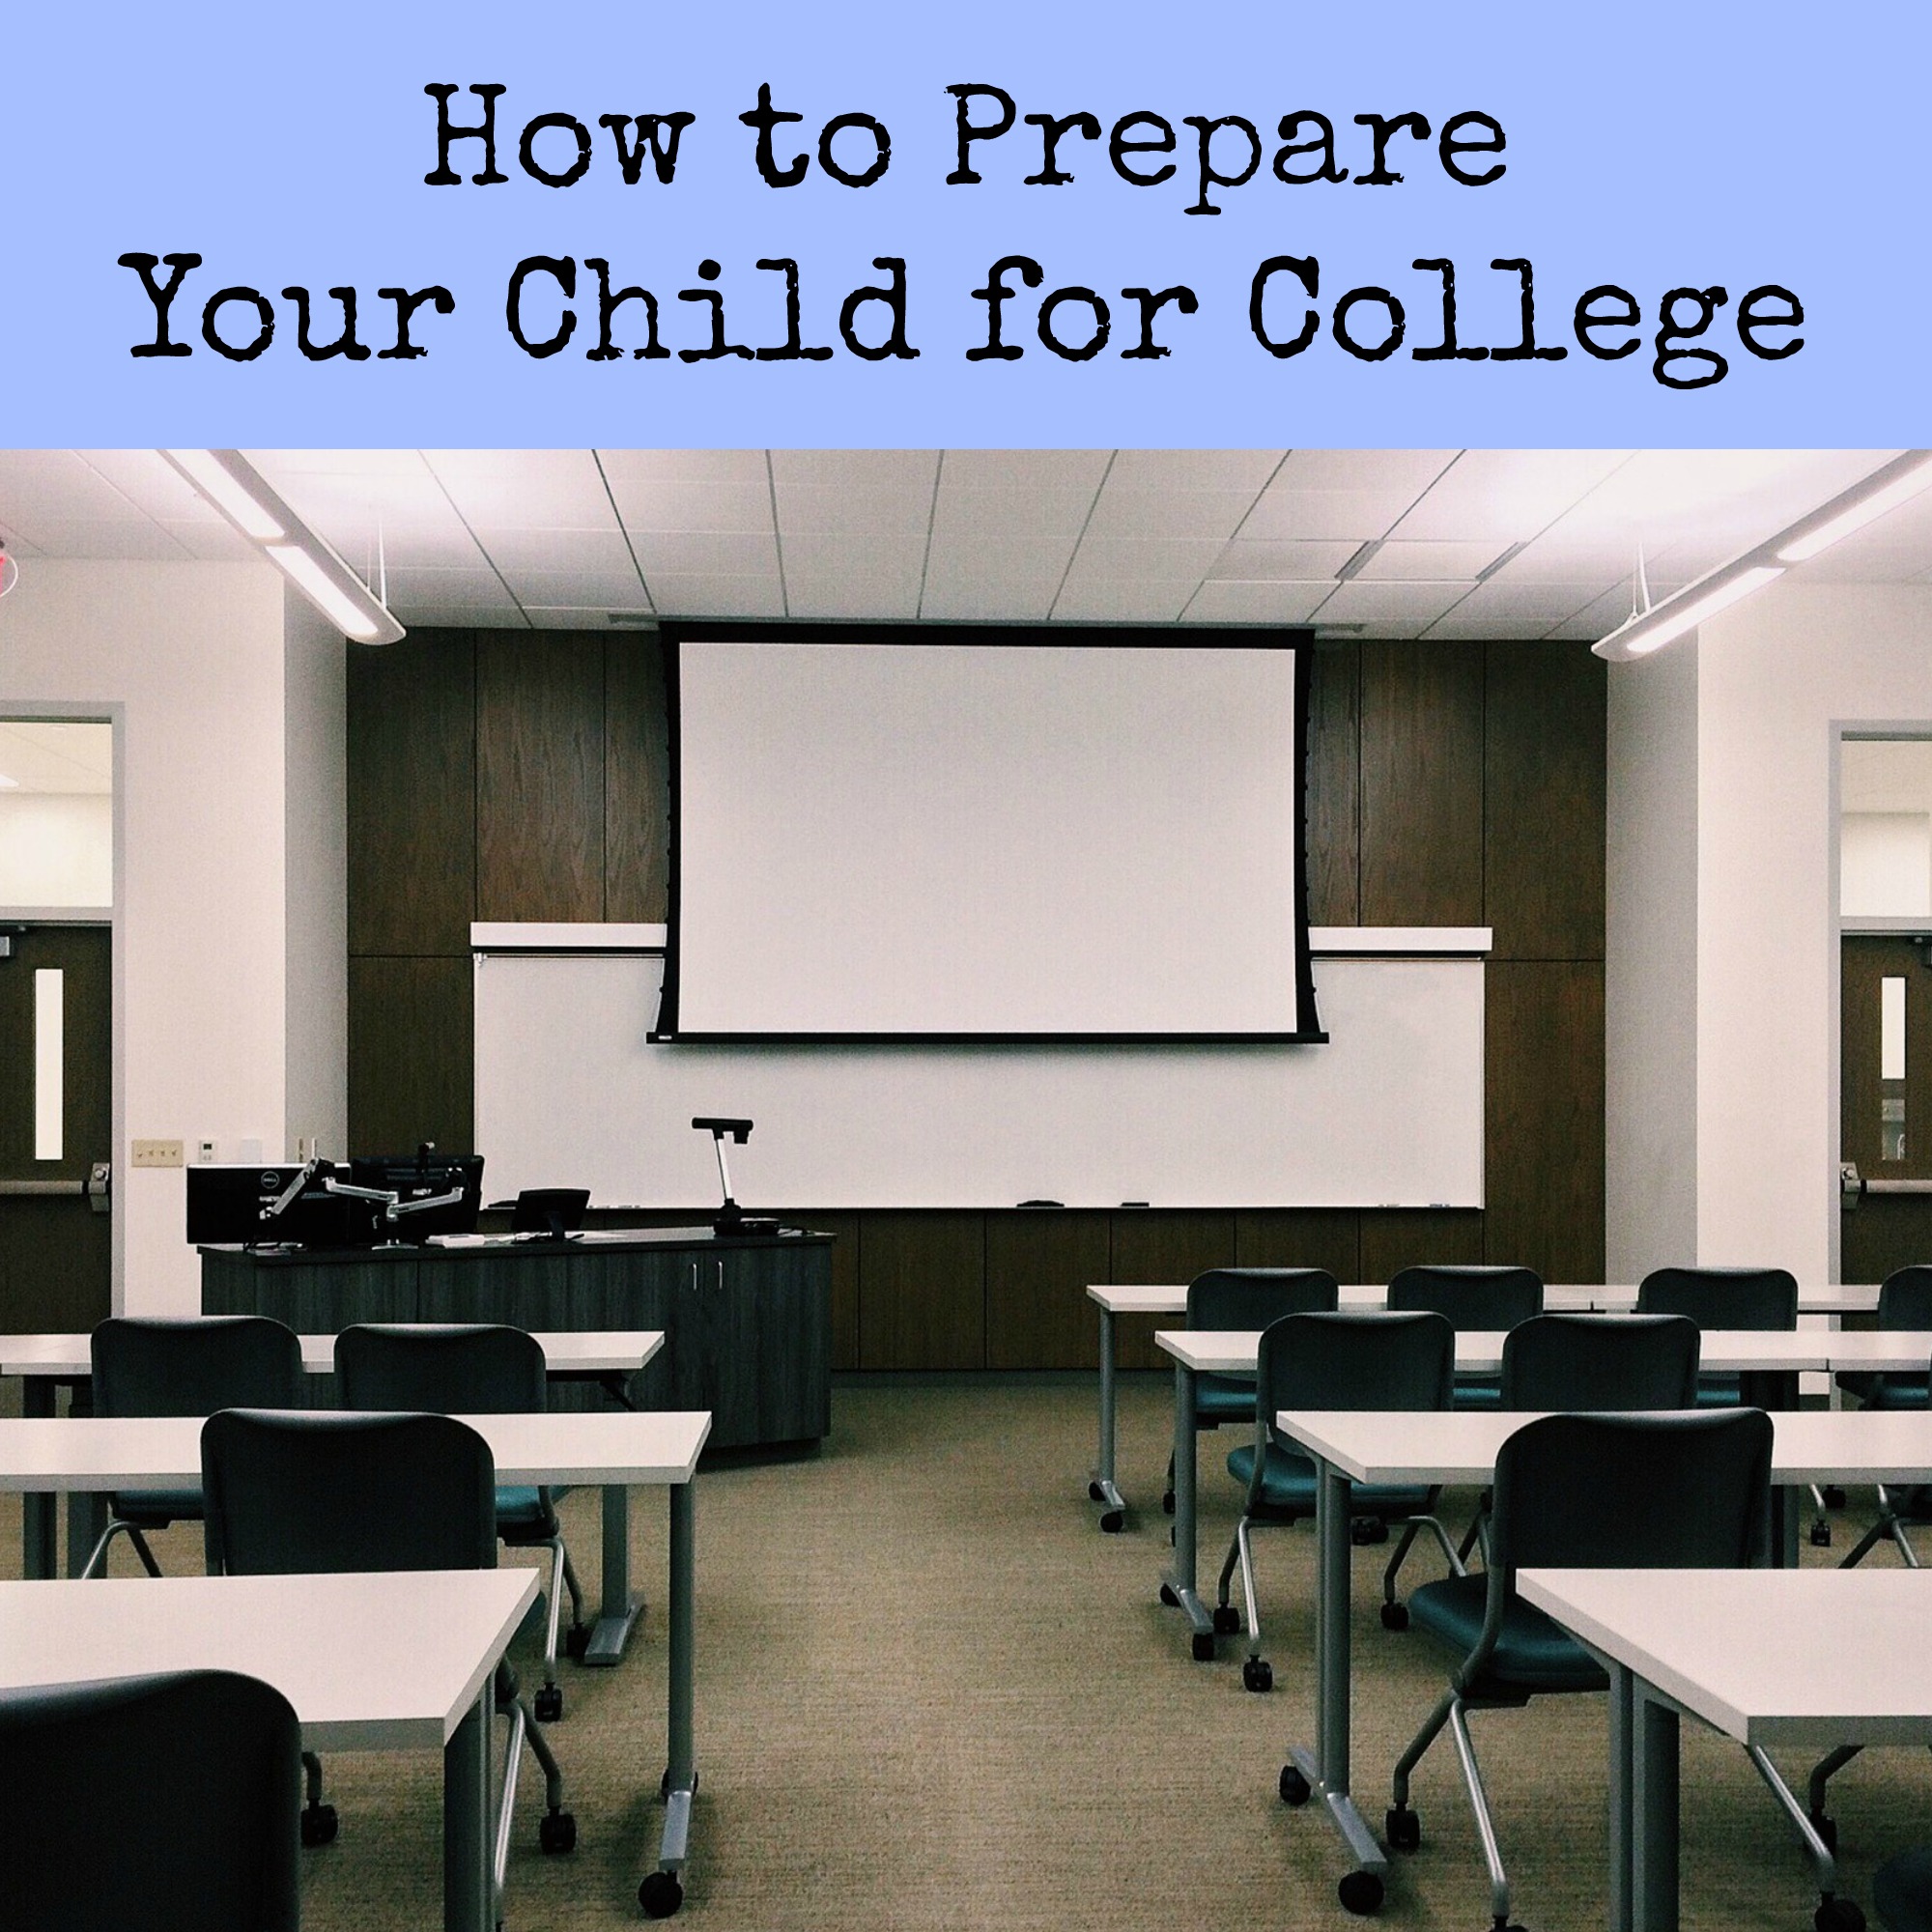 How to Prepare Your Child for College